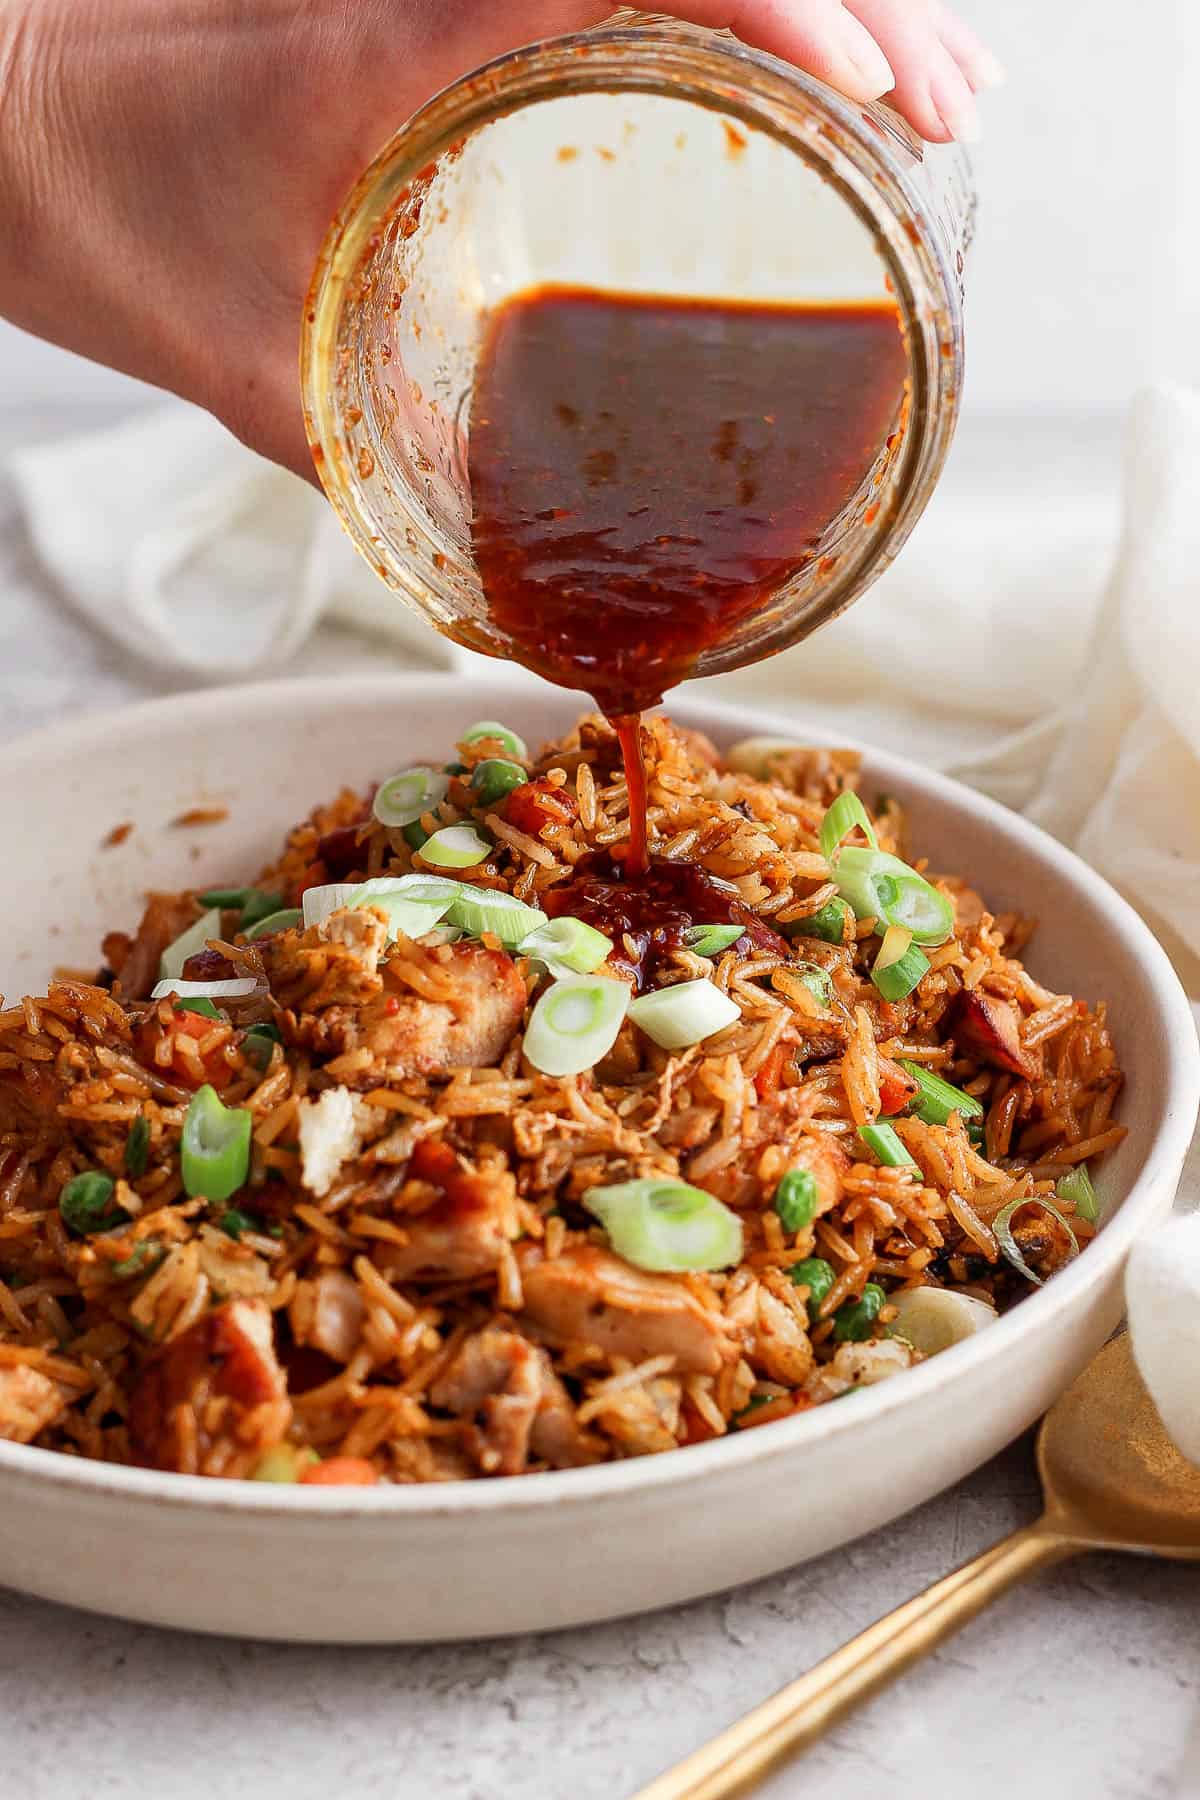 Fried rice sauce being poured over chicken fried rice.